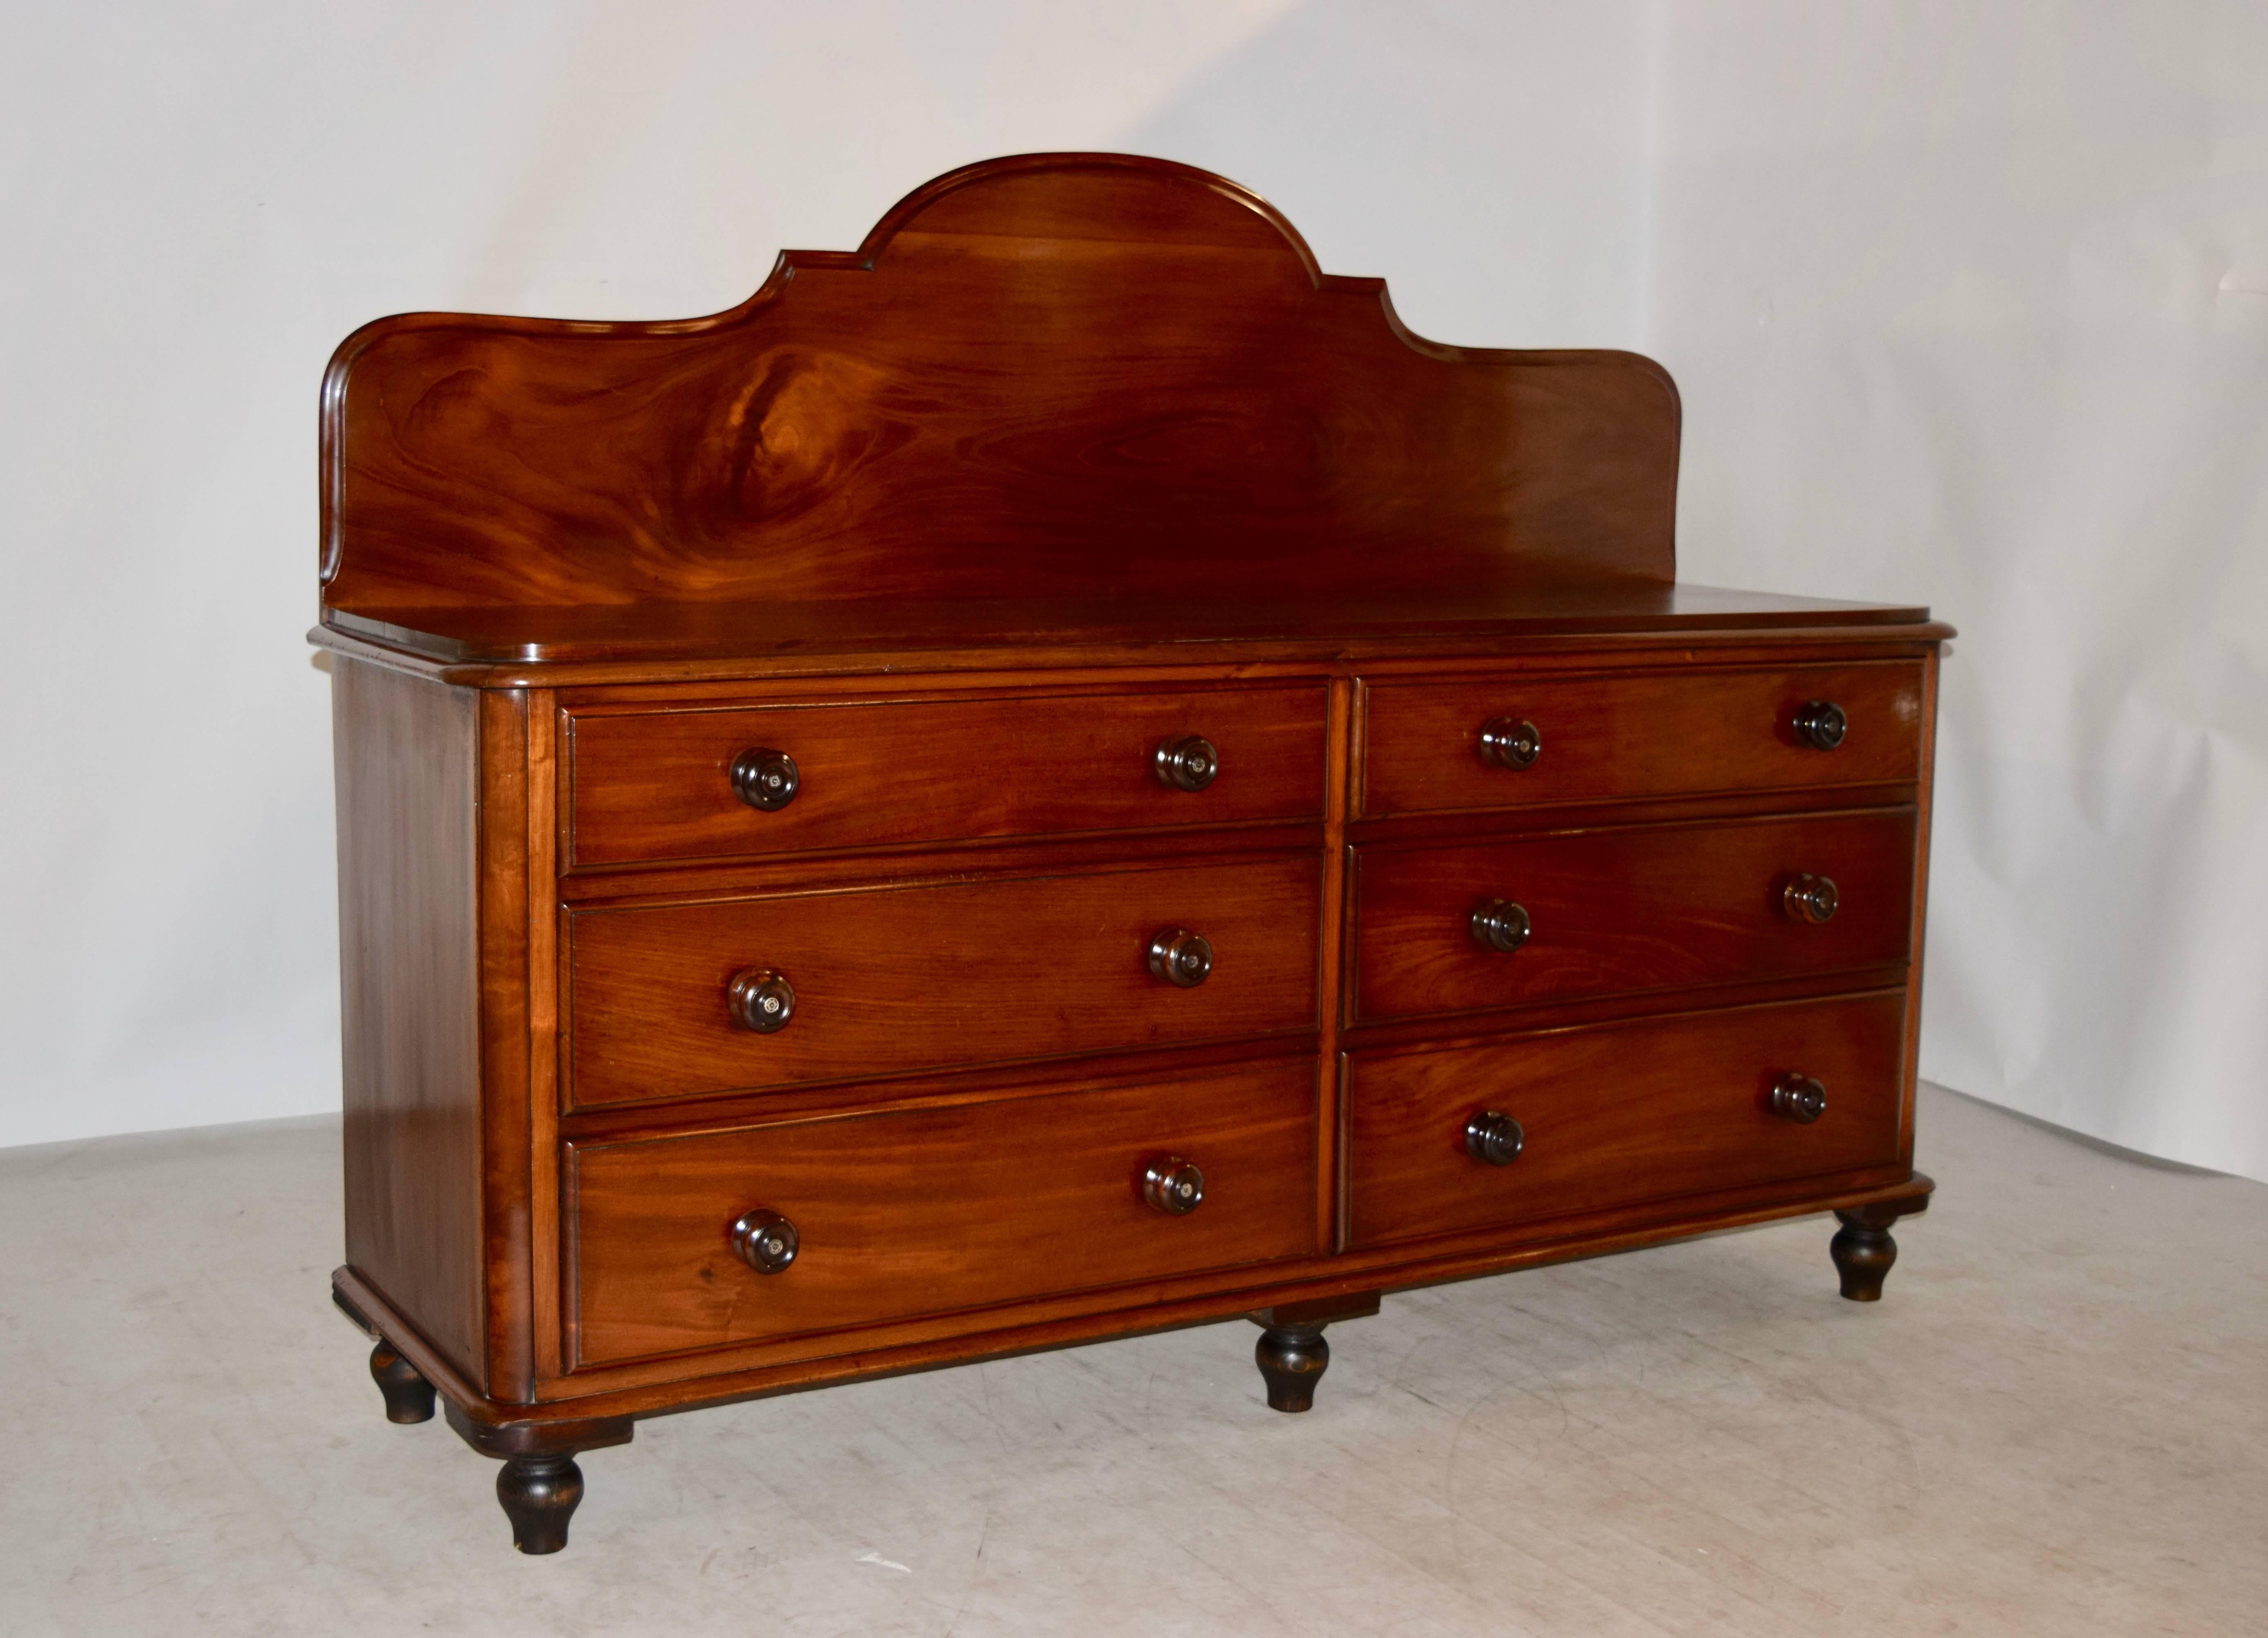 19th century English double dresser made from mahogany. The backsplash is removable, and is a lovely shape with scalloped and bevelled edges, following down to a wonderful single board top, which has rounded and molded corners. The case is simple on